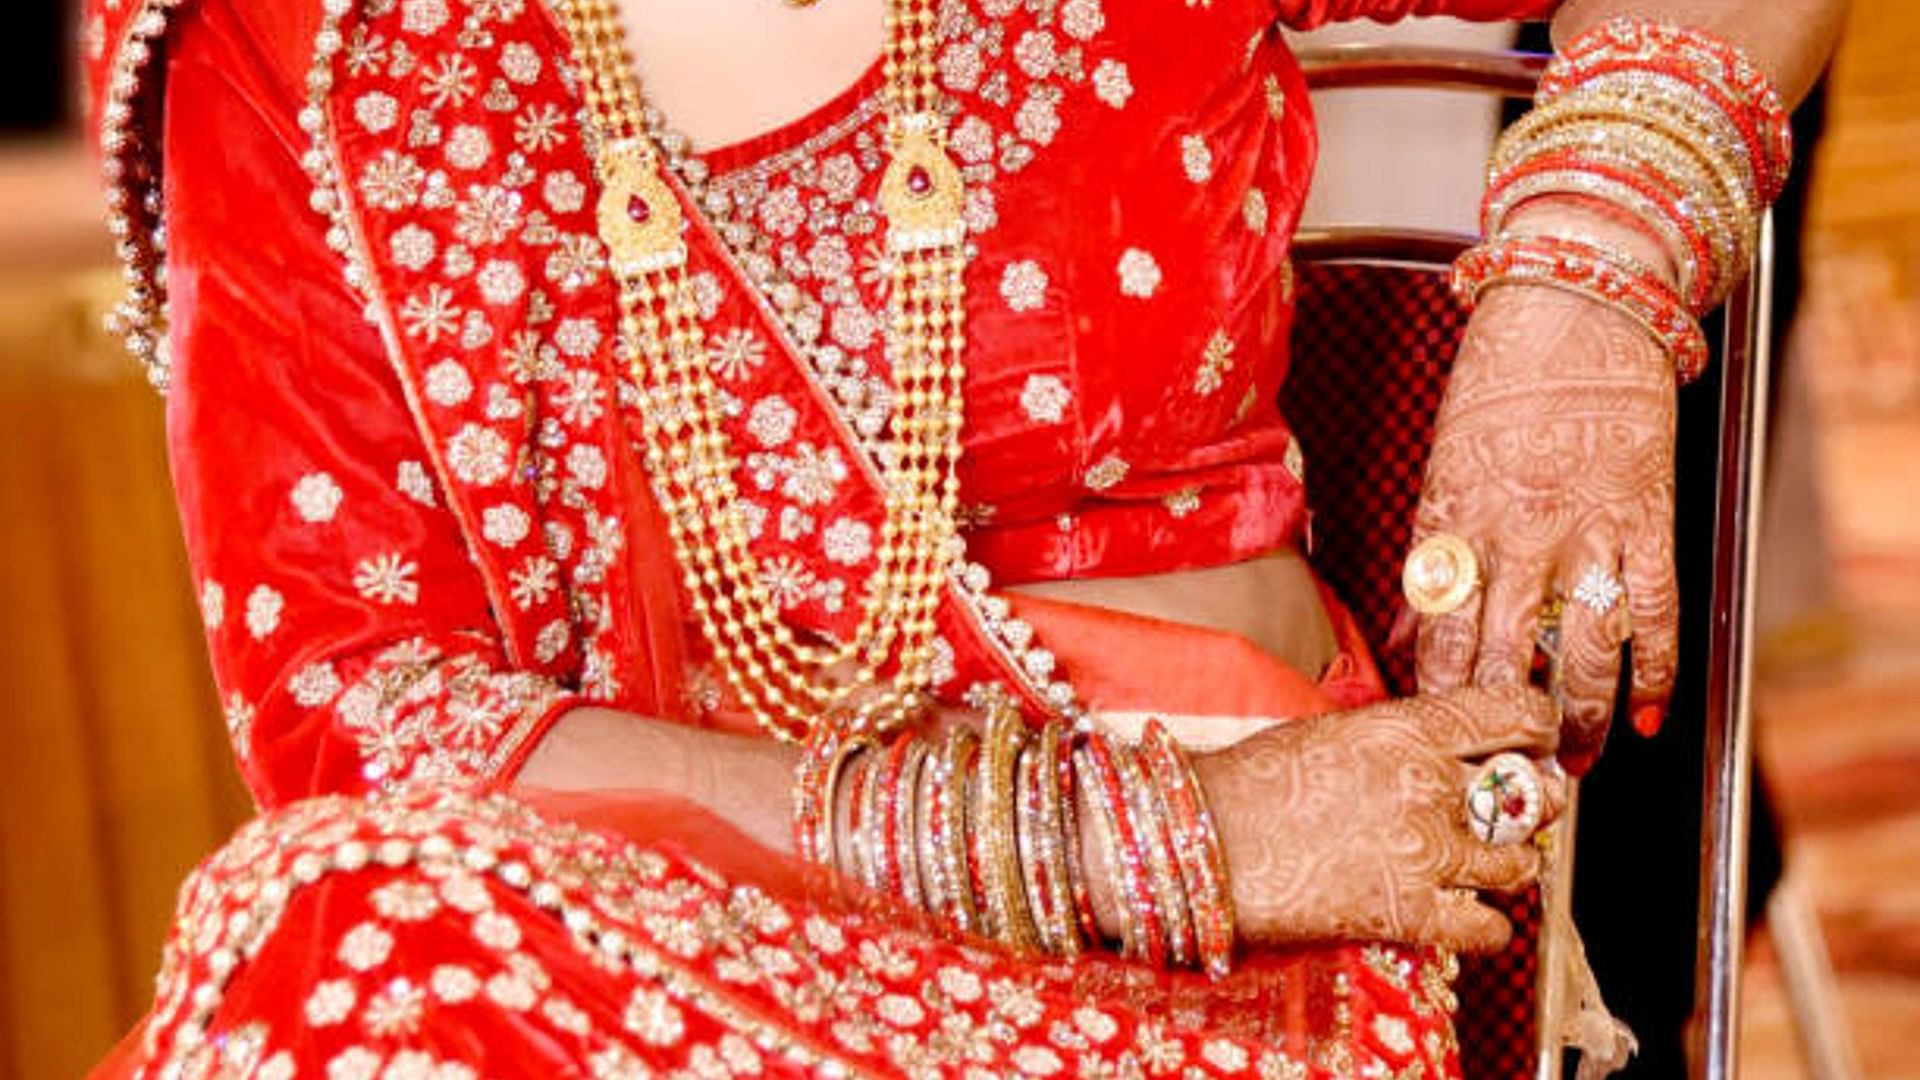 Know the scientific Reason Behind the bride's Red Colour Wedding Dress